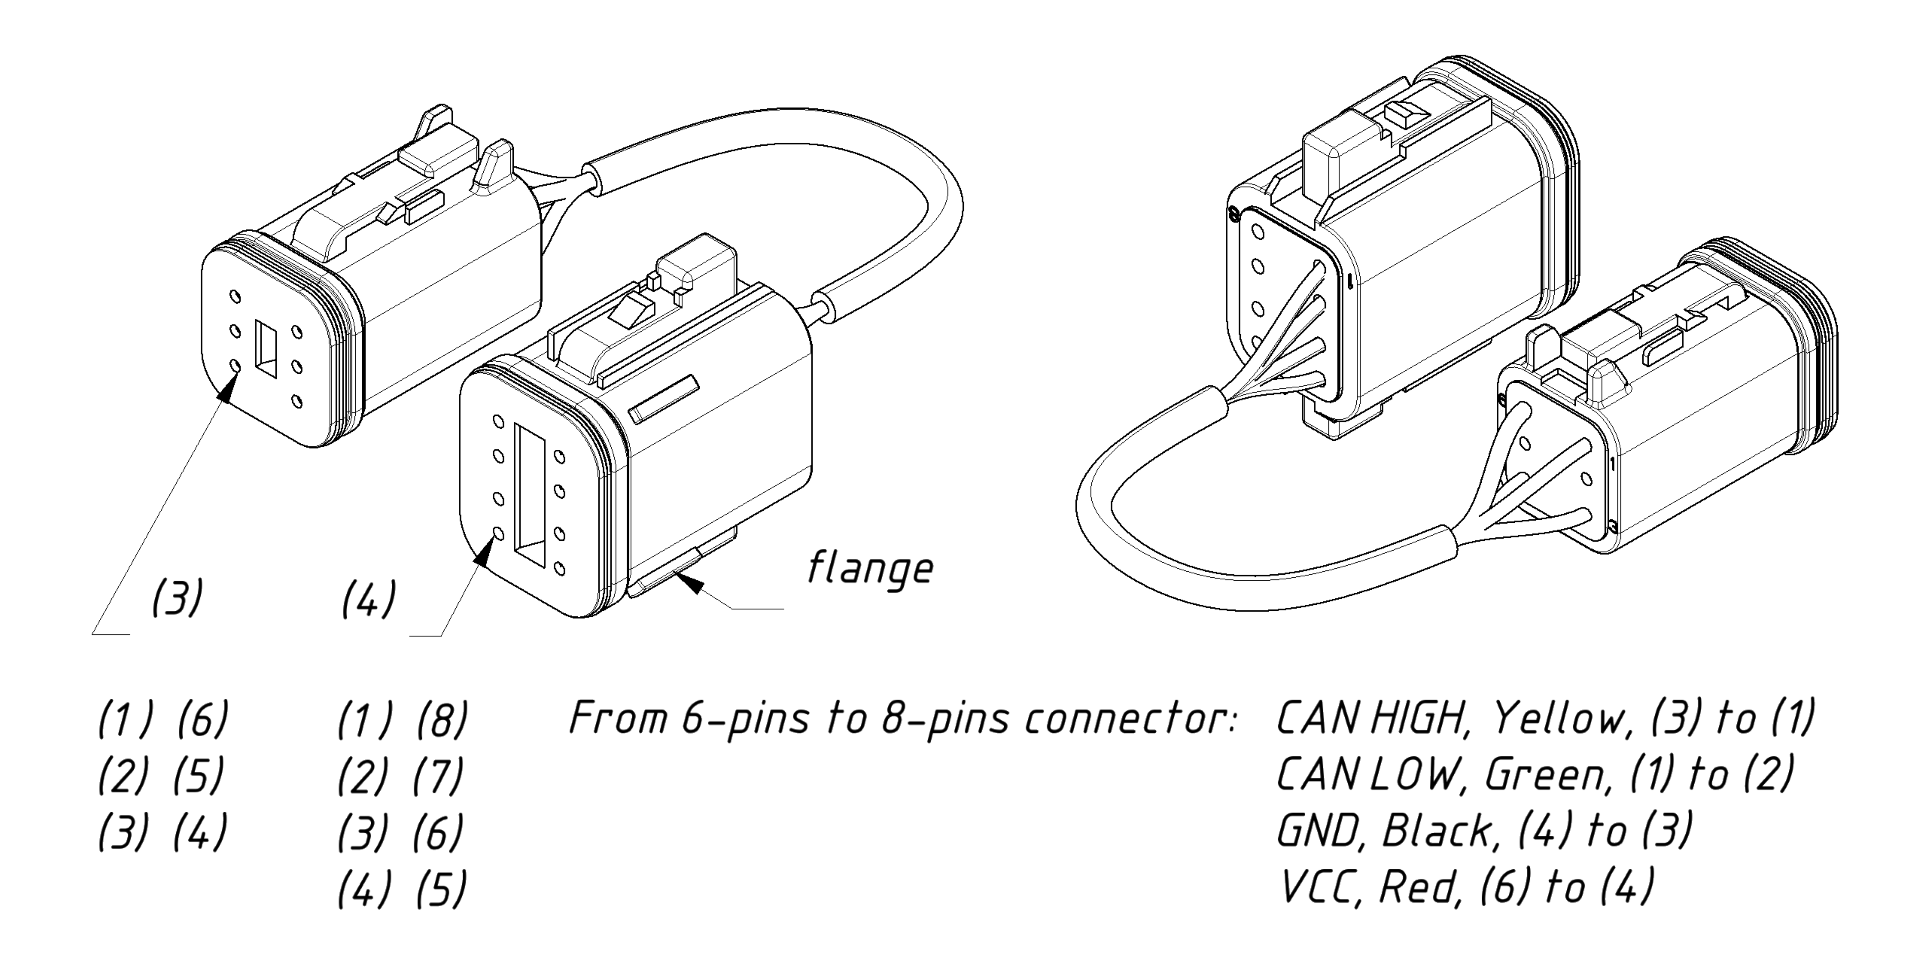 Adaptor cable for 8-pin EVC/Vodia connector, click to enlarge